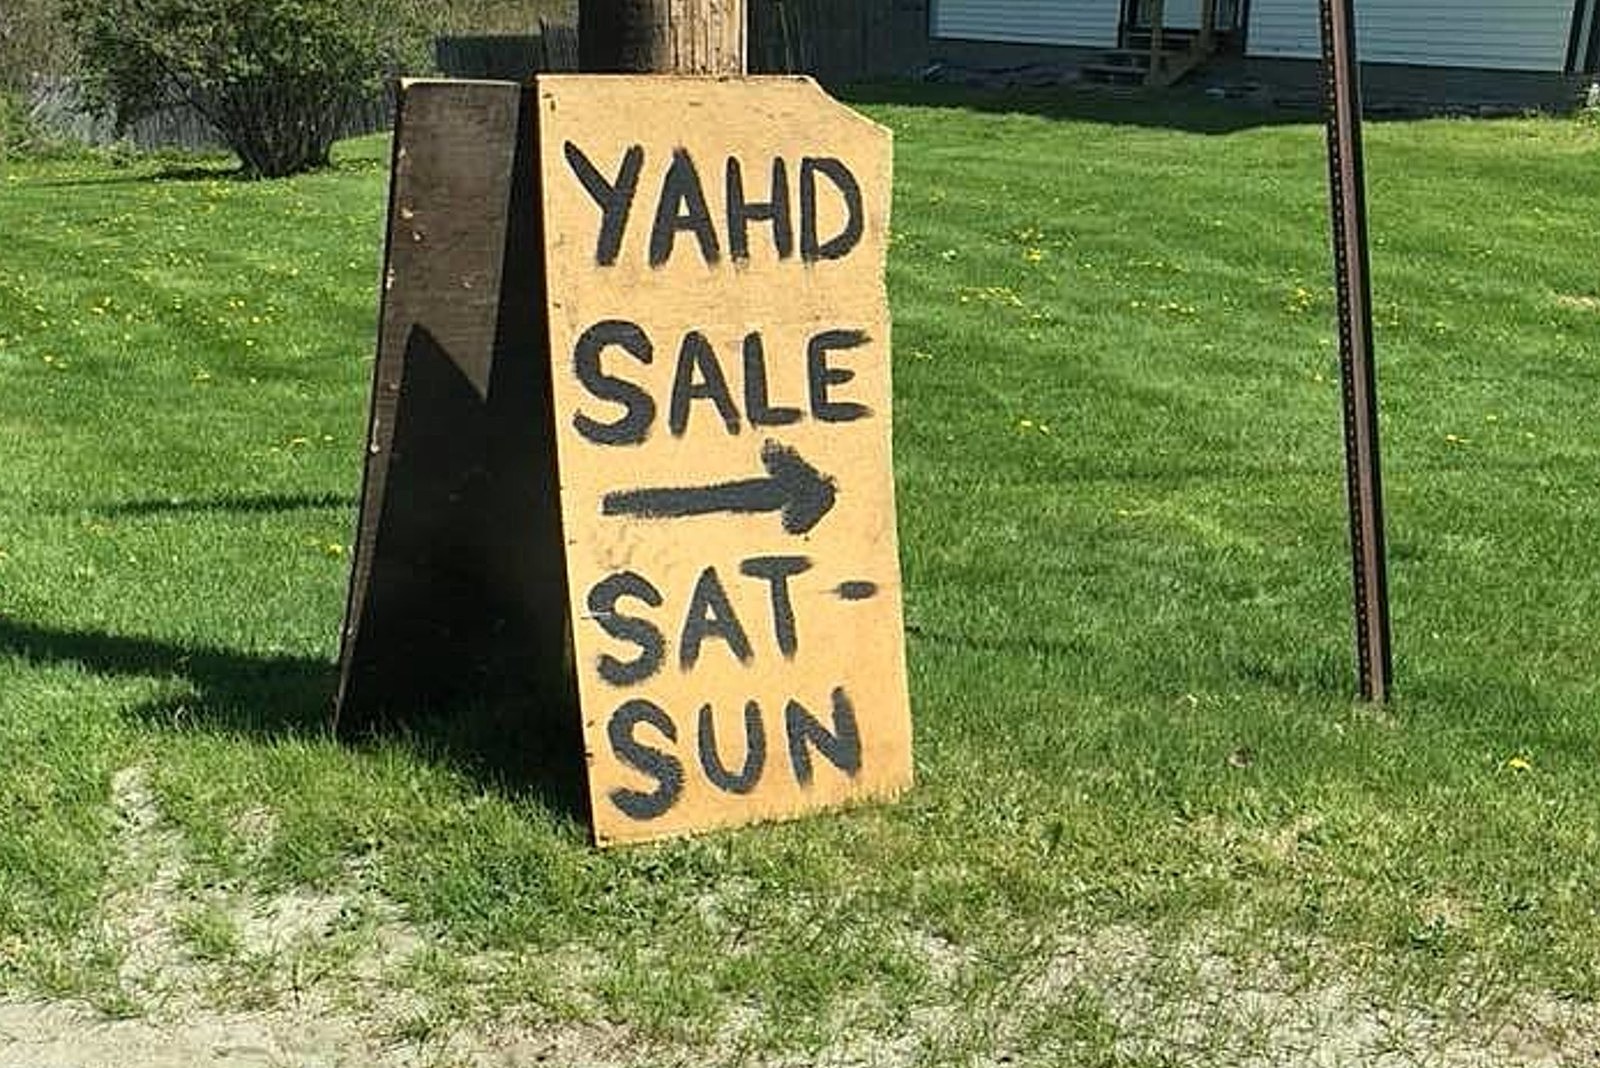 do you need a permit for a garagesale in chicago